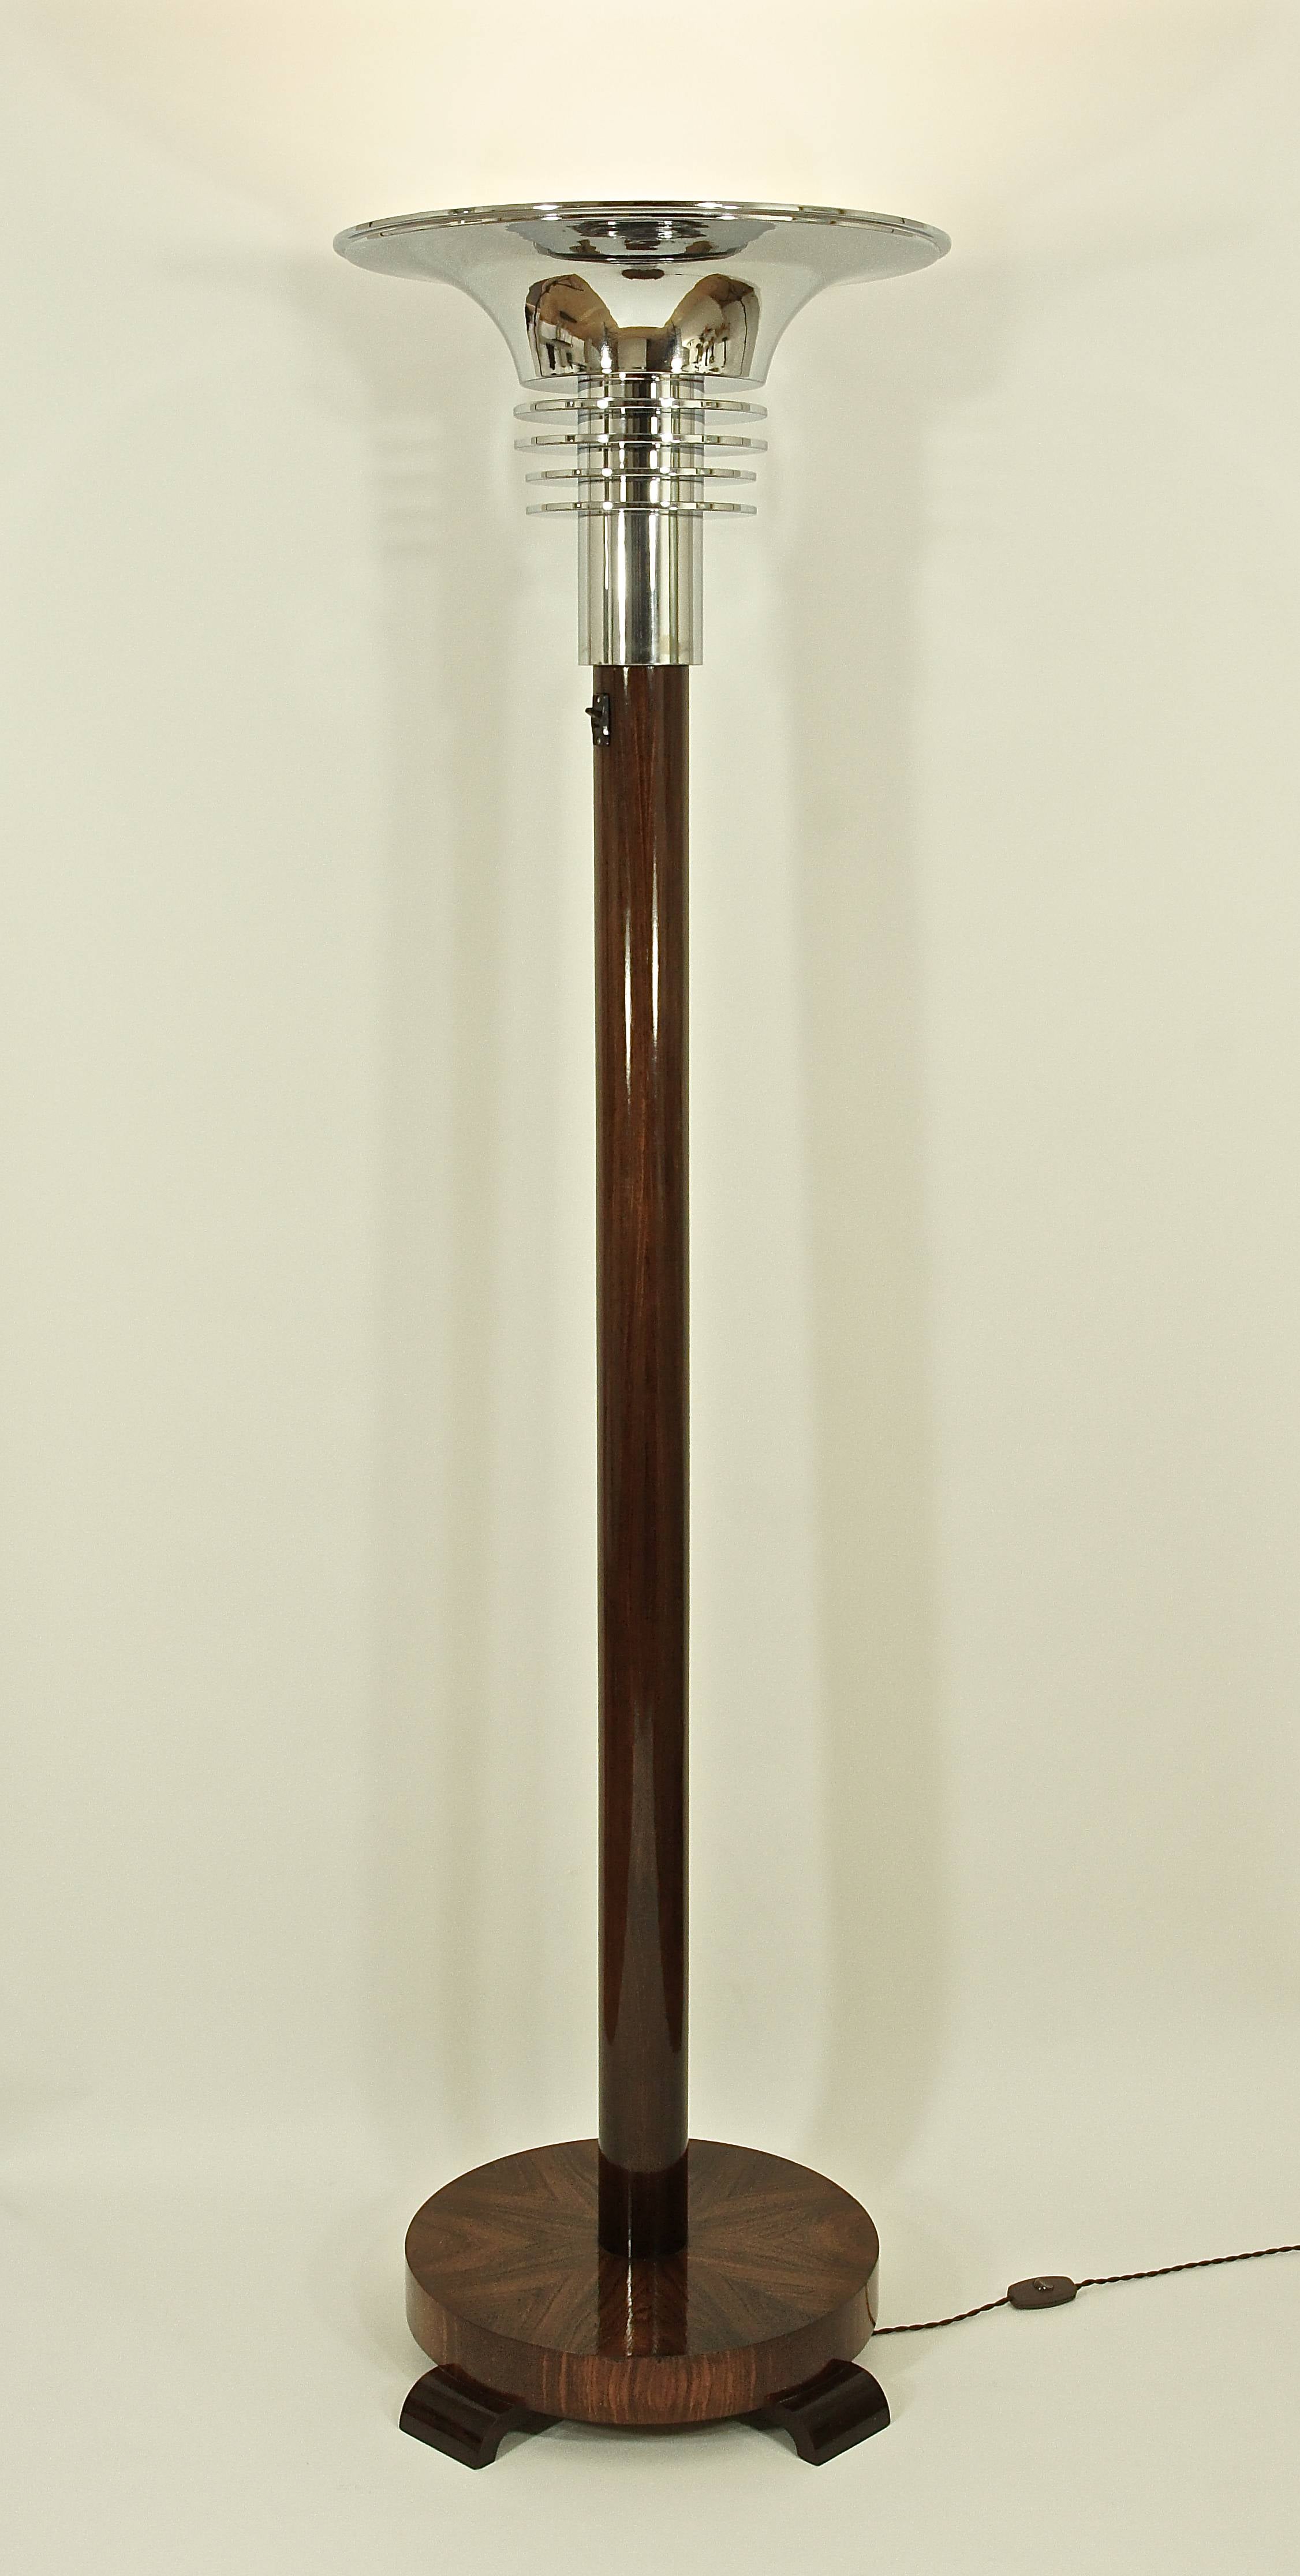 Spectacular French Art Deco Chrome And Wood Torchiere Floor Lamp.